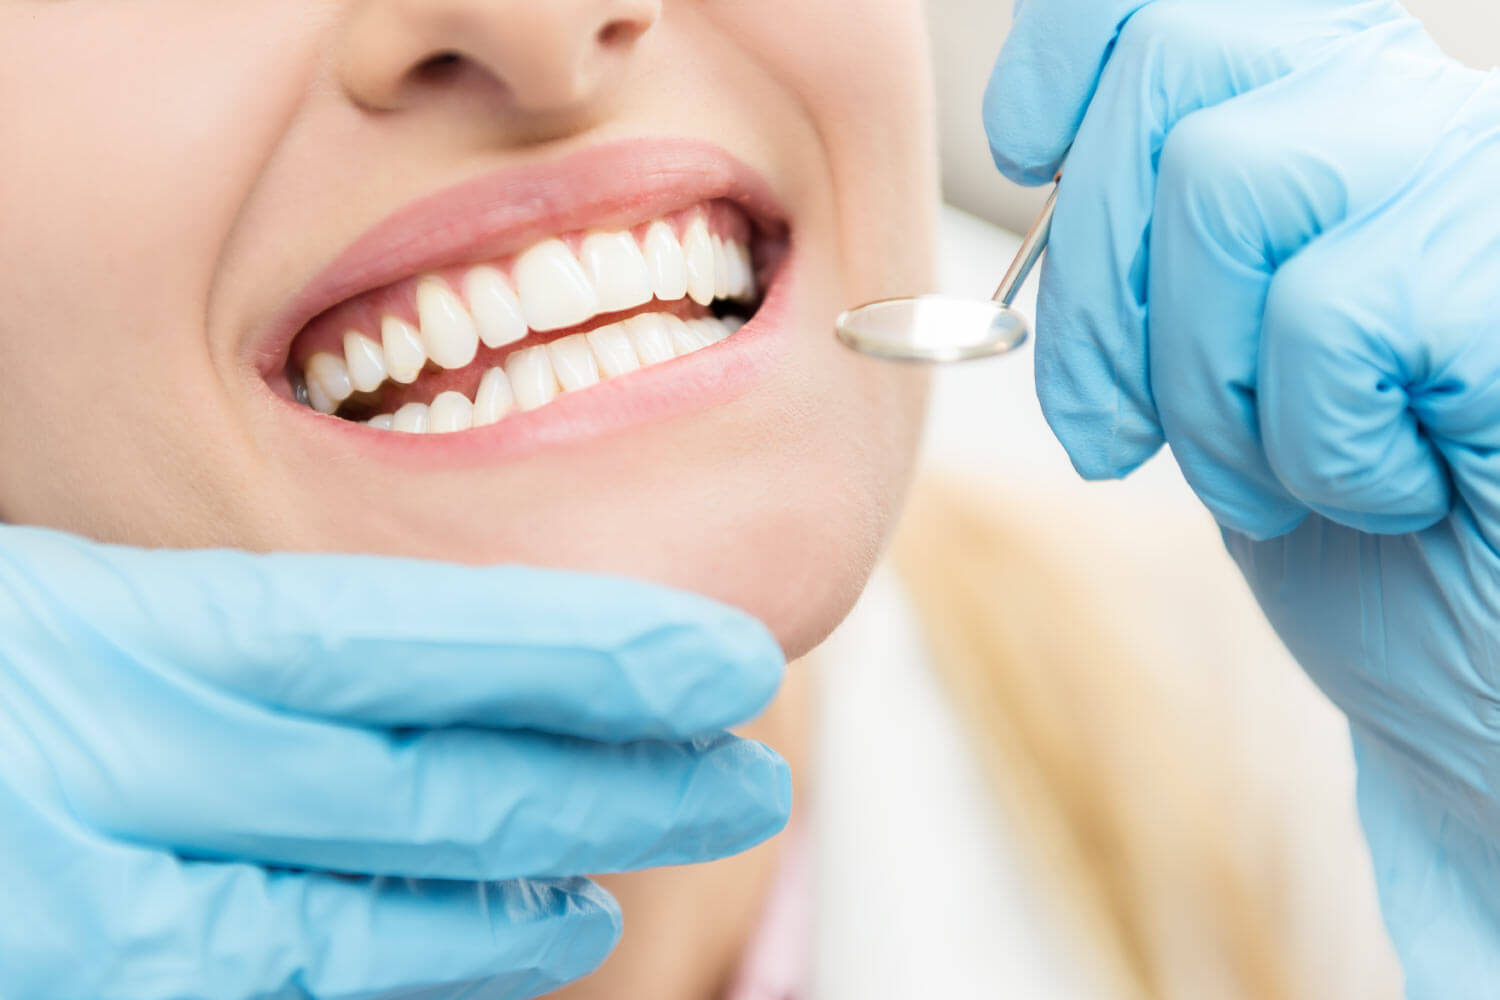 Close up of a woman's smile next to blue gloved hands holding a special dental mirror during her dental cleaning